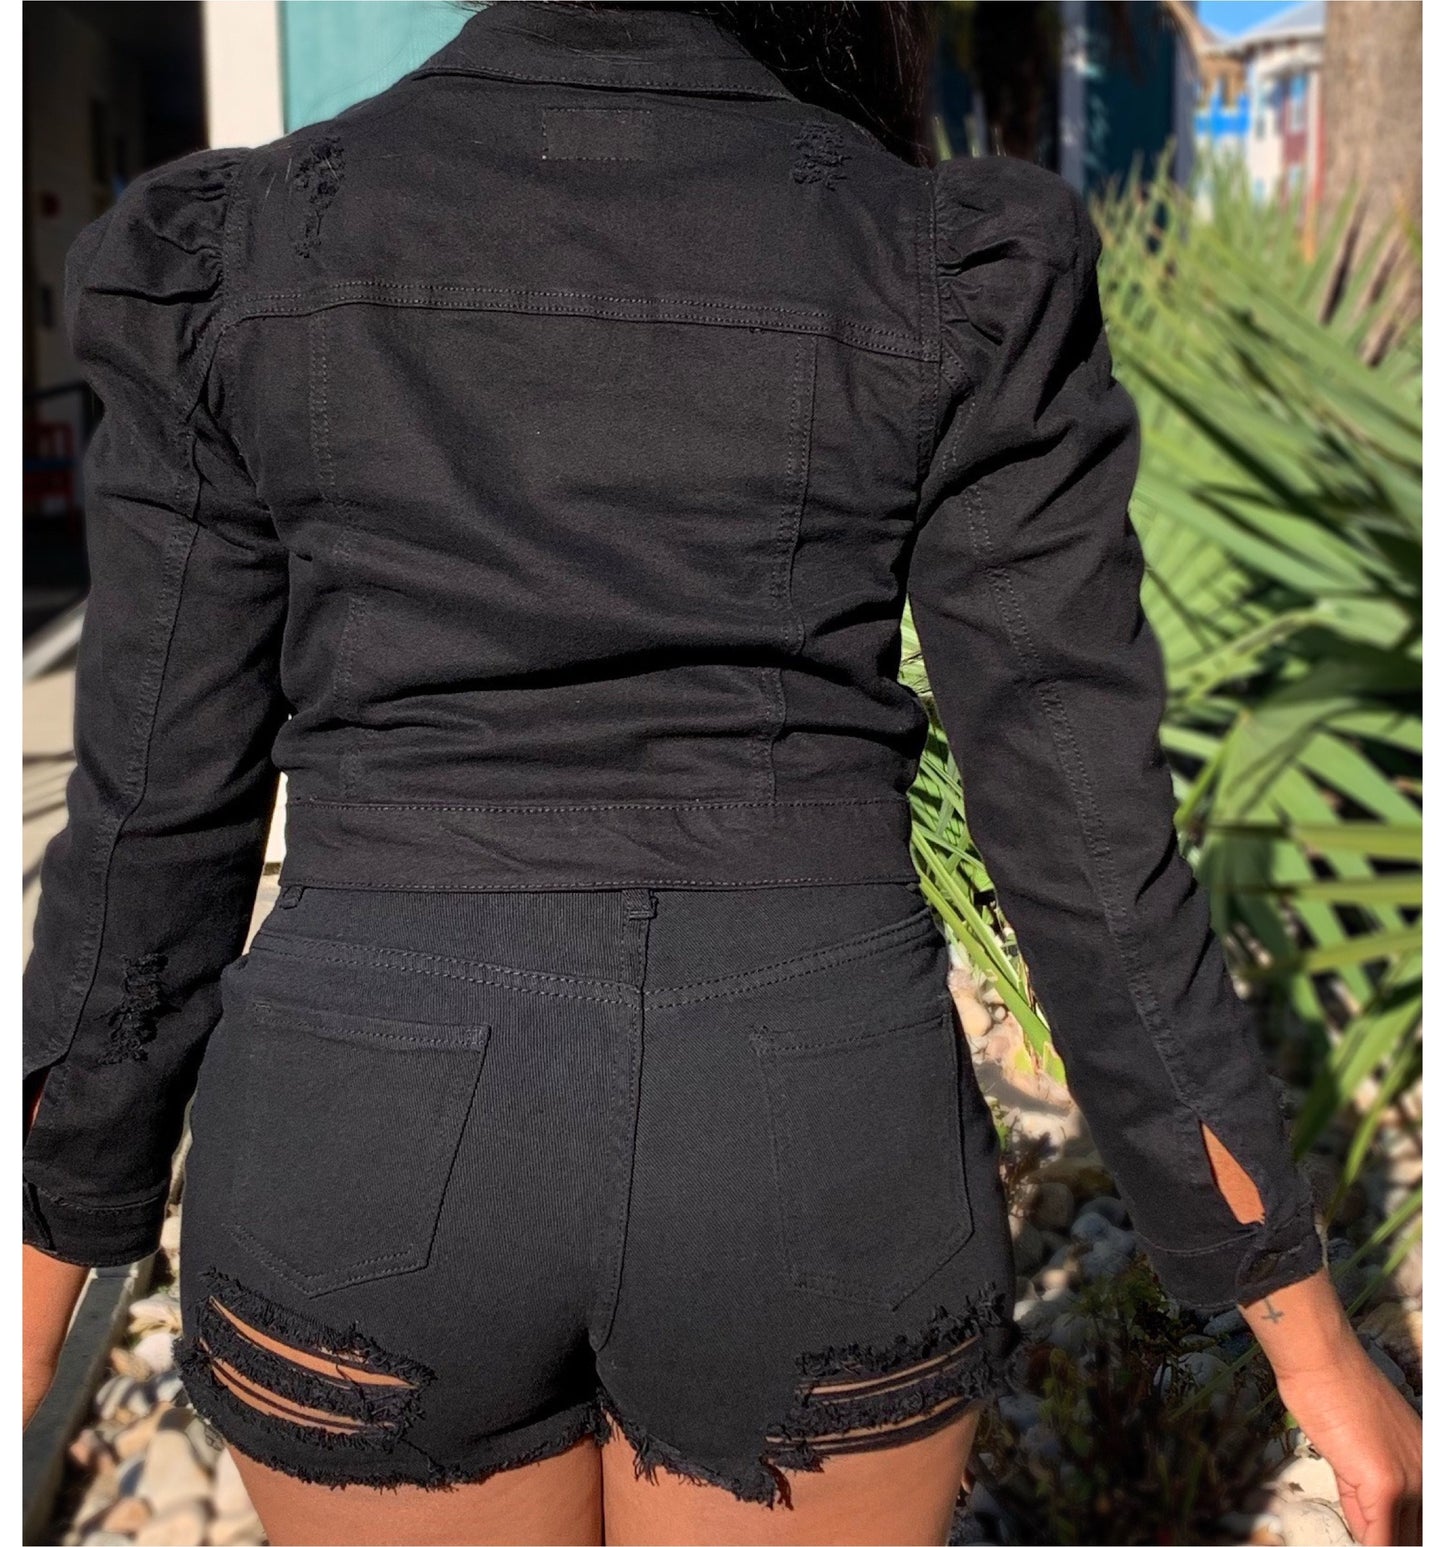 What the Puff Jacket (Black)